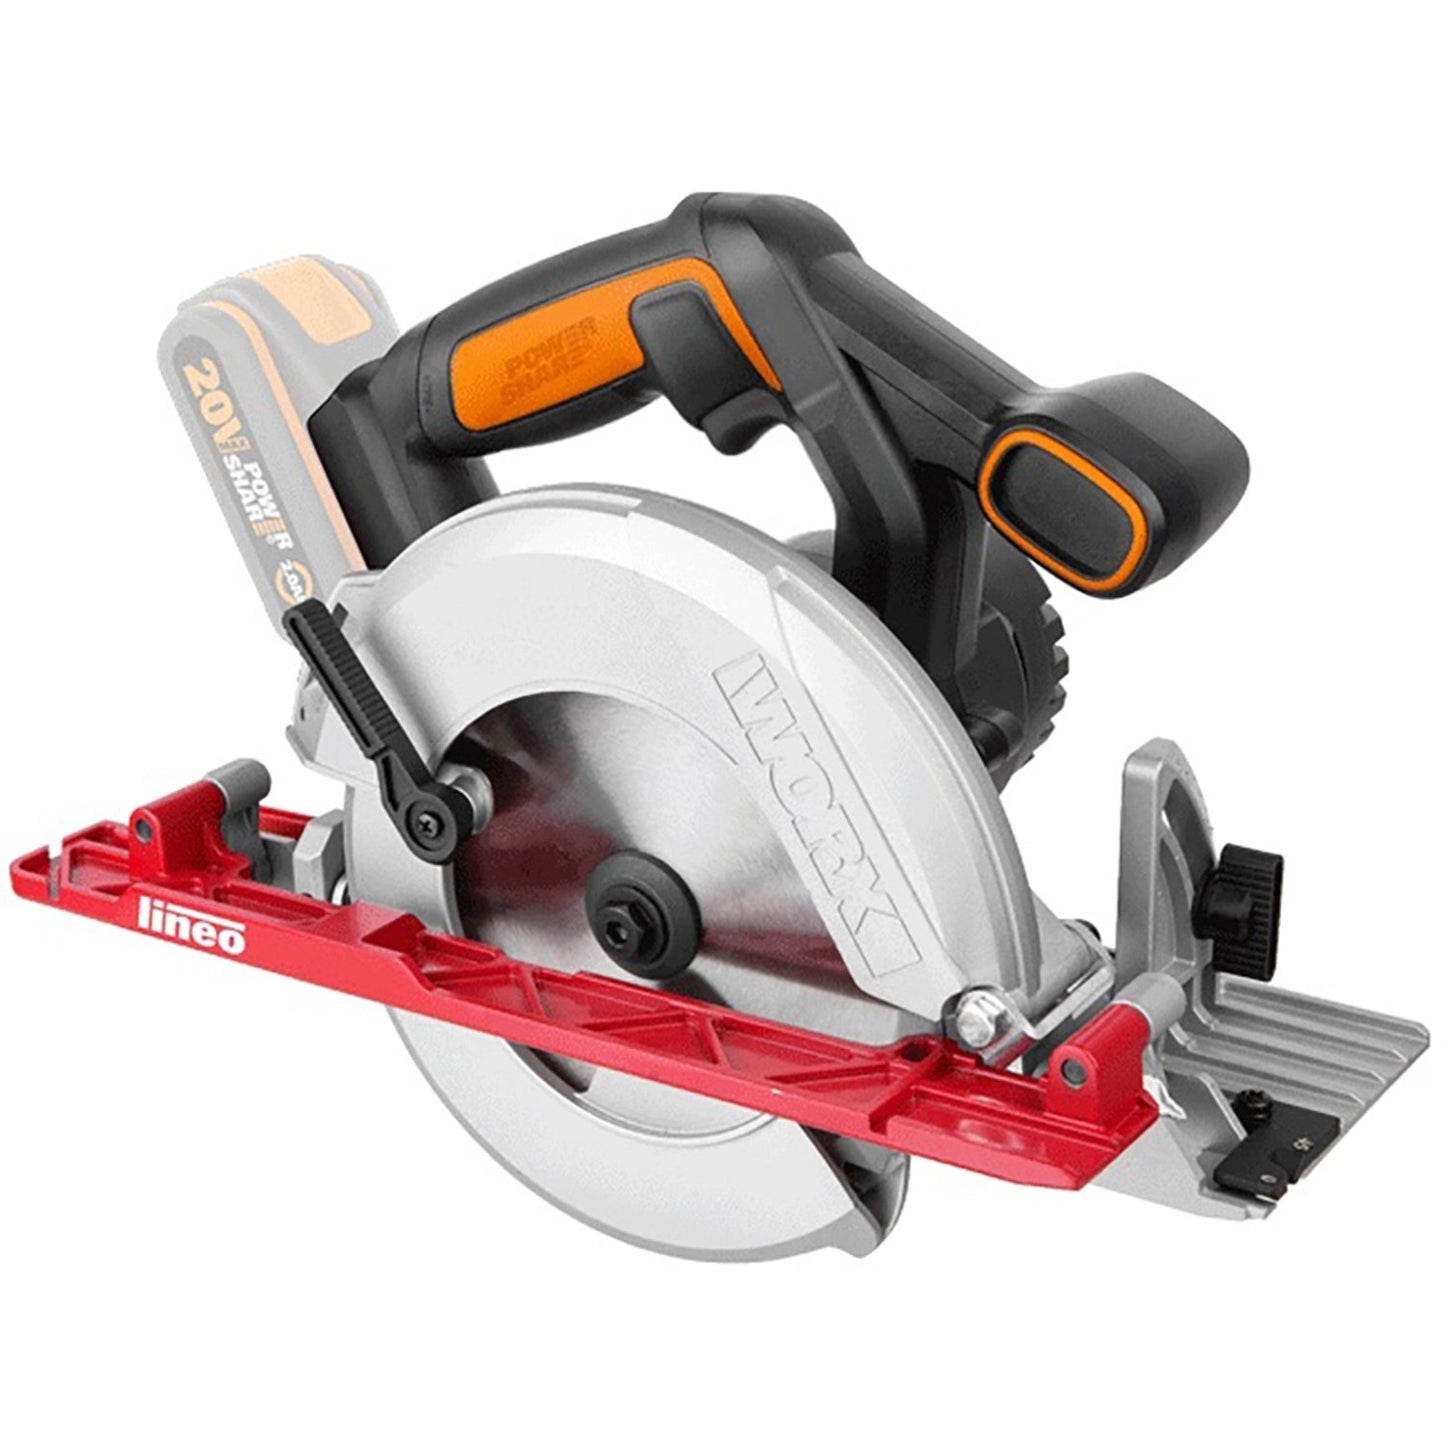 WORX cordless hand-held circular saw EXACTRACK 20V (without battery and charger) WX530.9